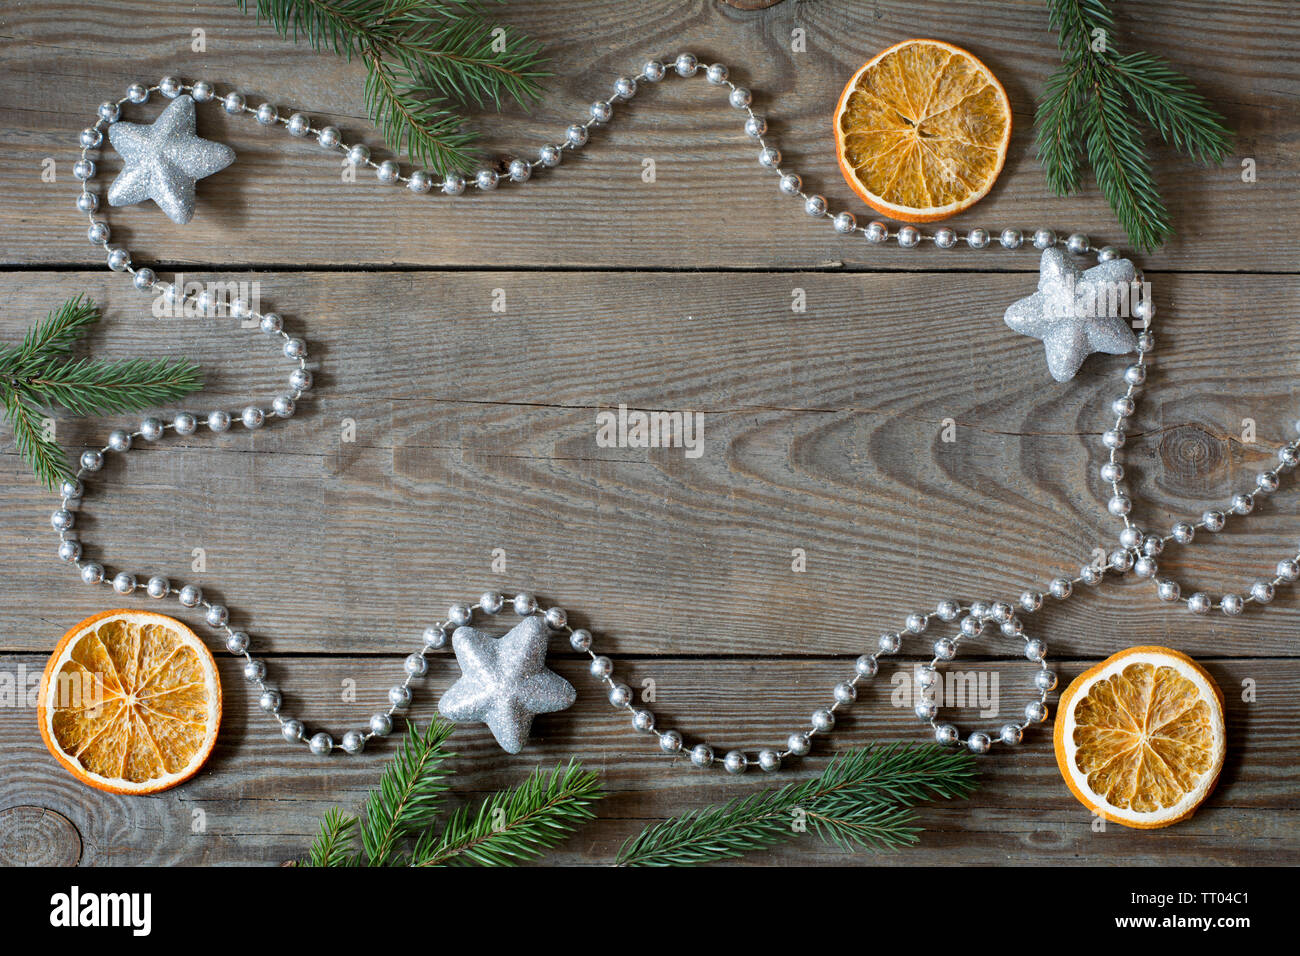 Christmas composition with silver bead chain, brocade stars, orange slices and fir tree branches on wooden background Stock Photo